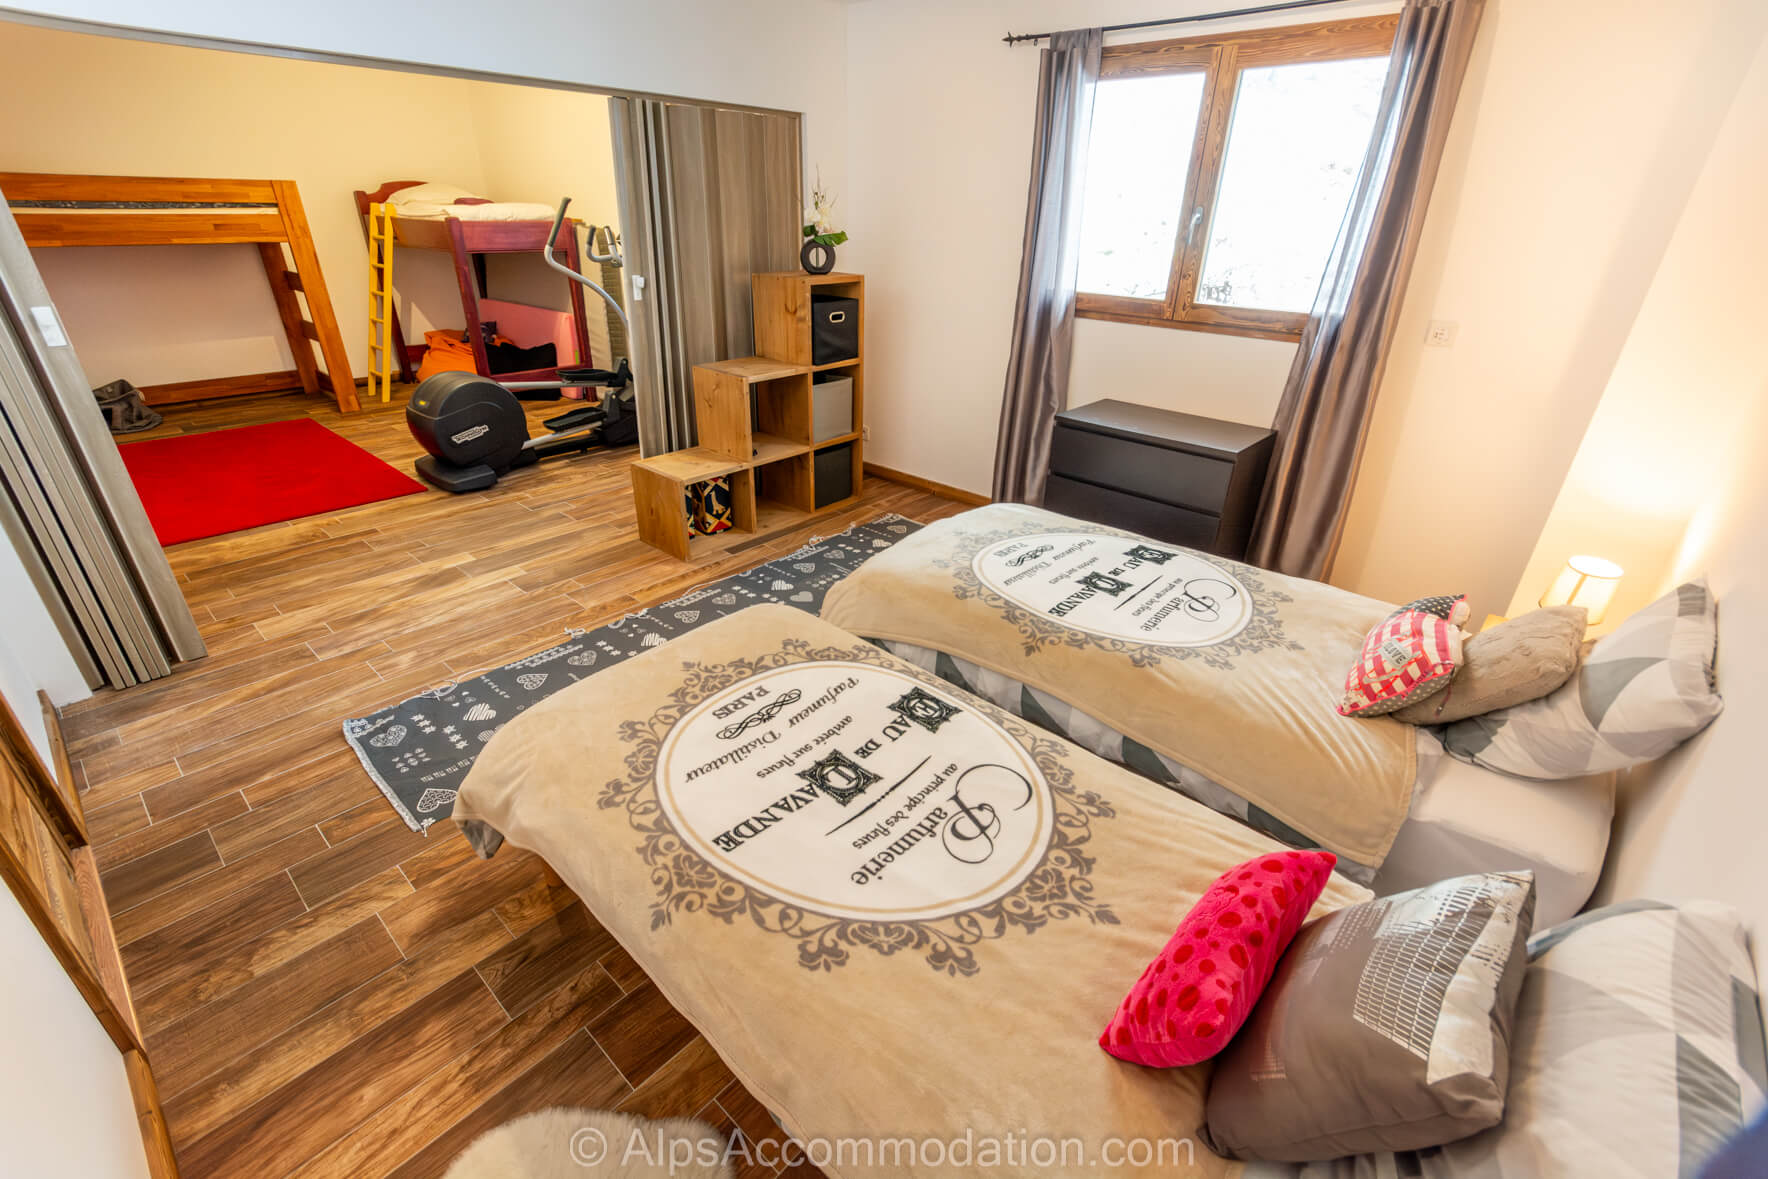 Chalet Sole Mio Morillon A removable wall allows bedrooms 5 and 6 to be one large bedroom or two bedrooms.